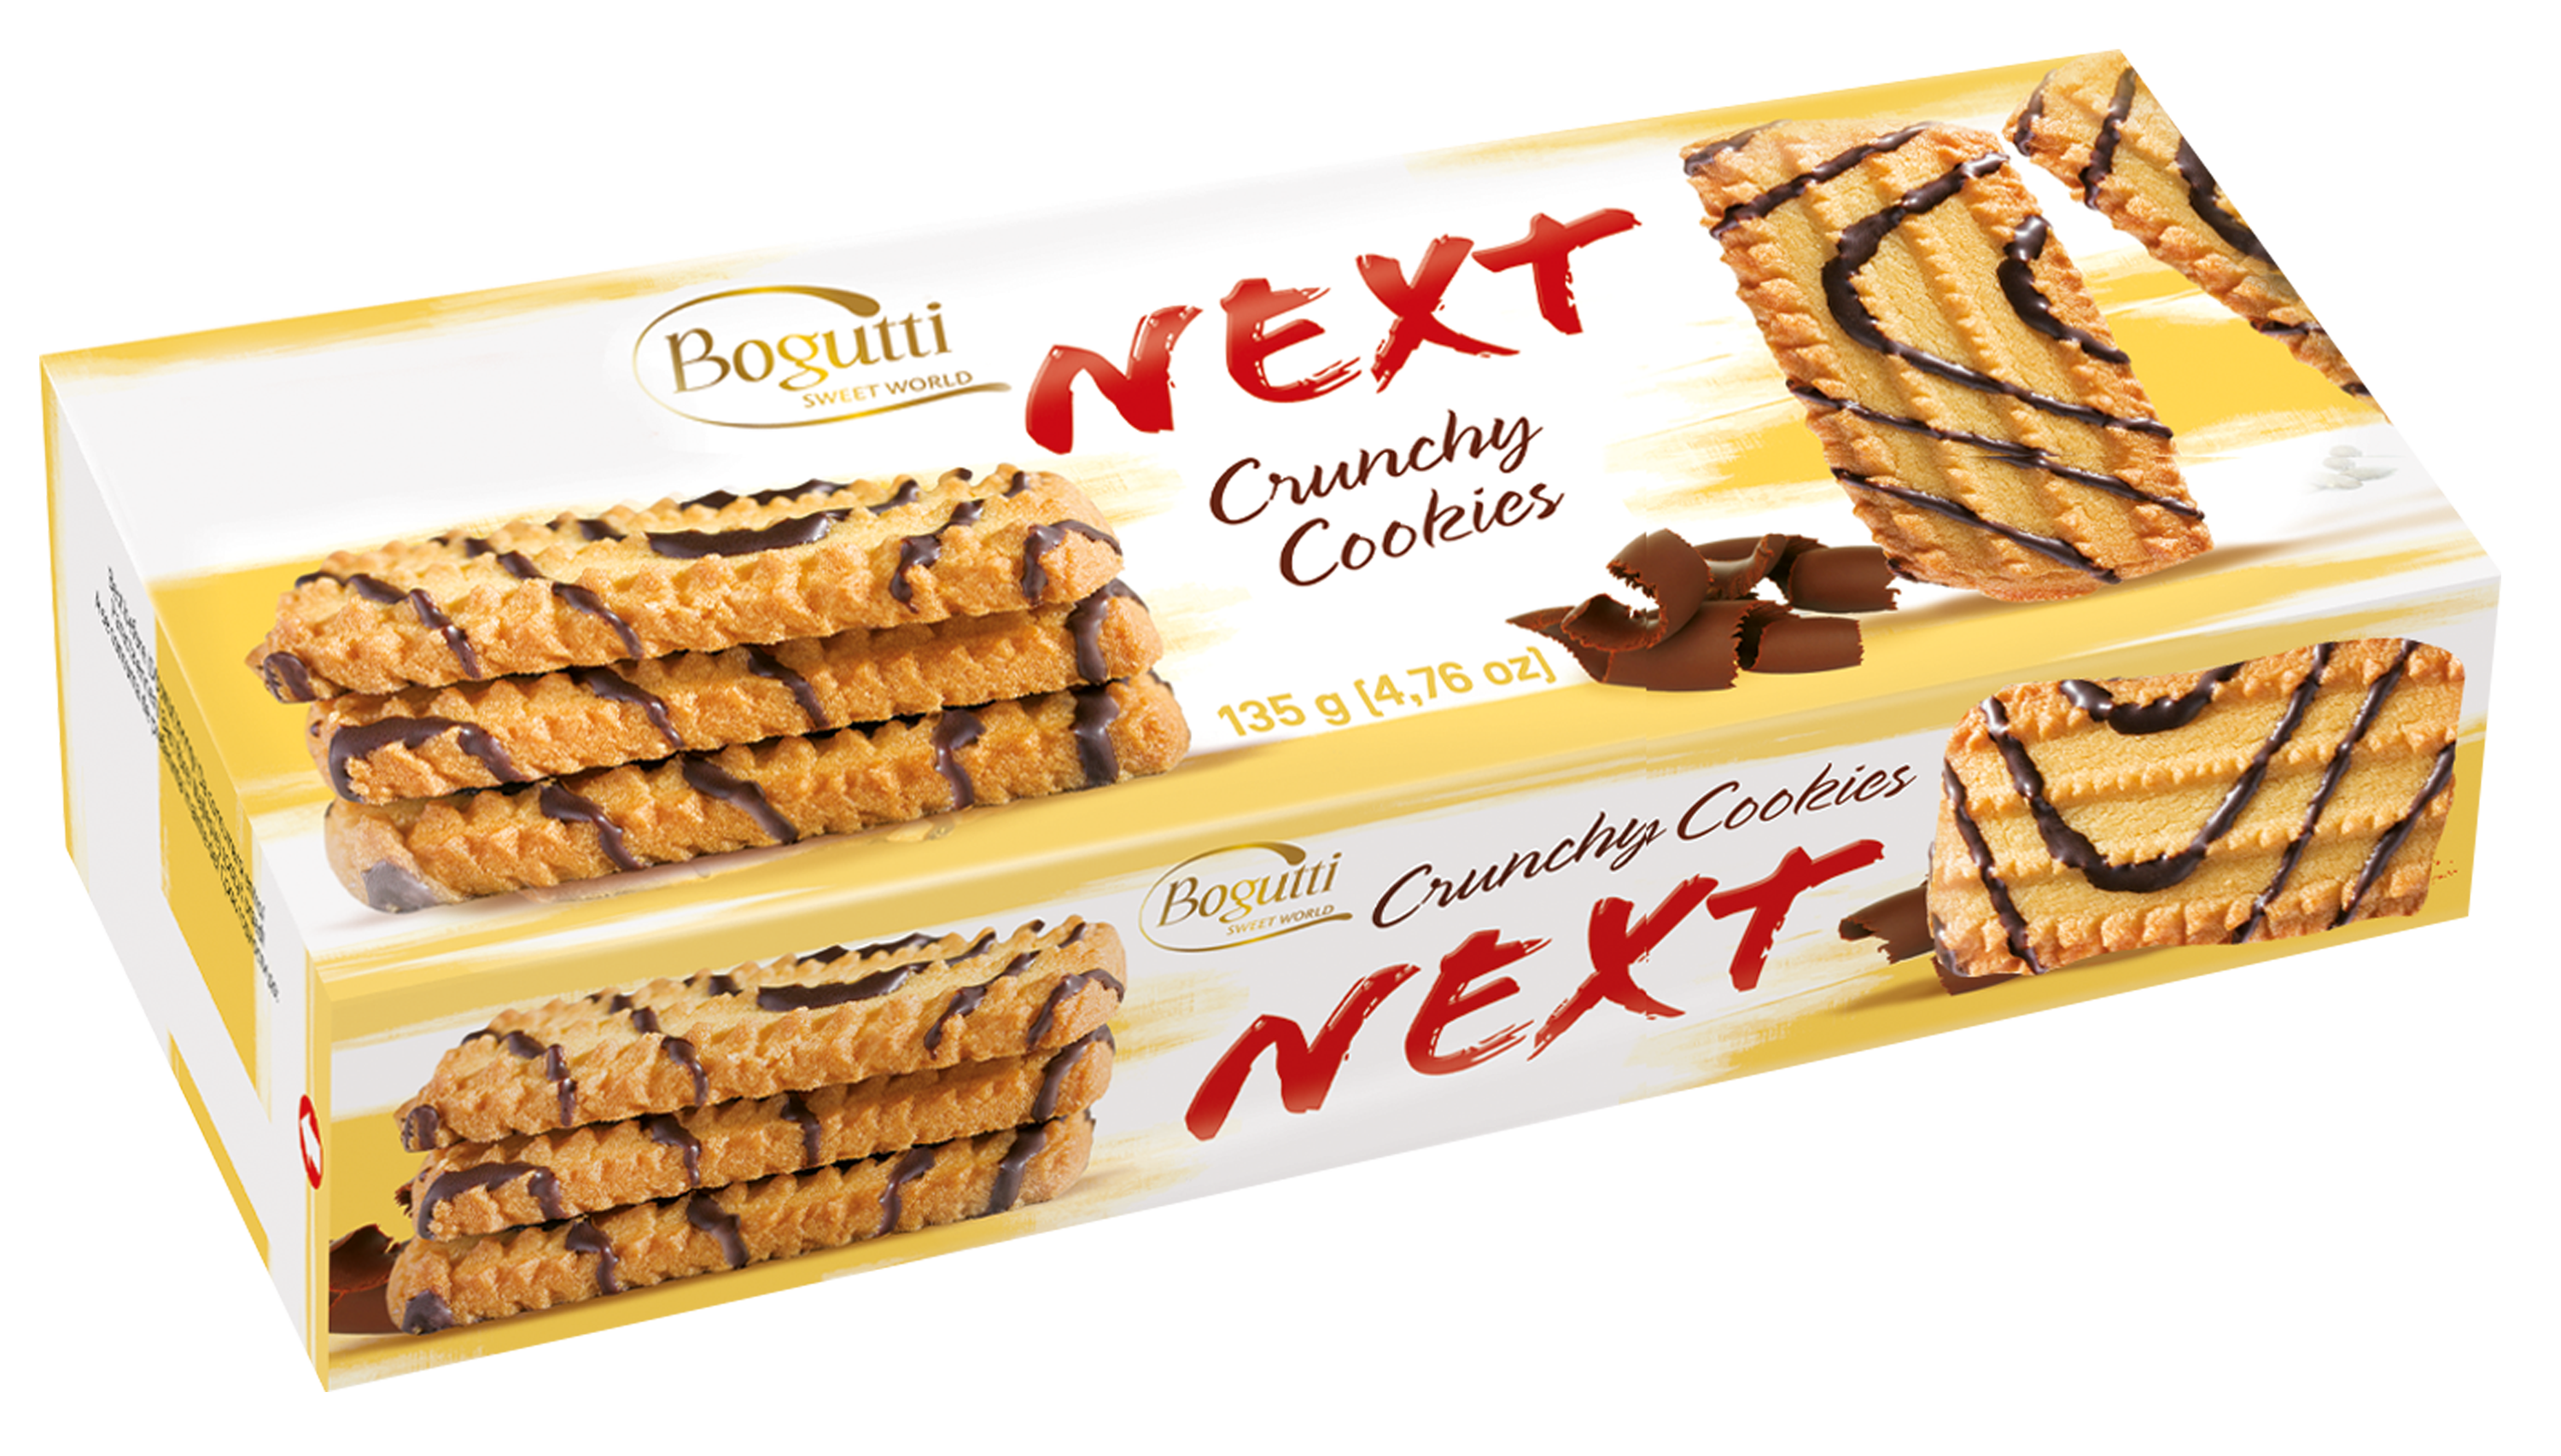 NEXT – Crunchy cookies decorated with cocoa coating